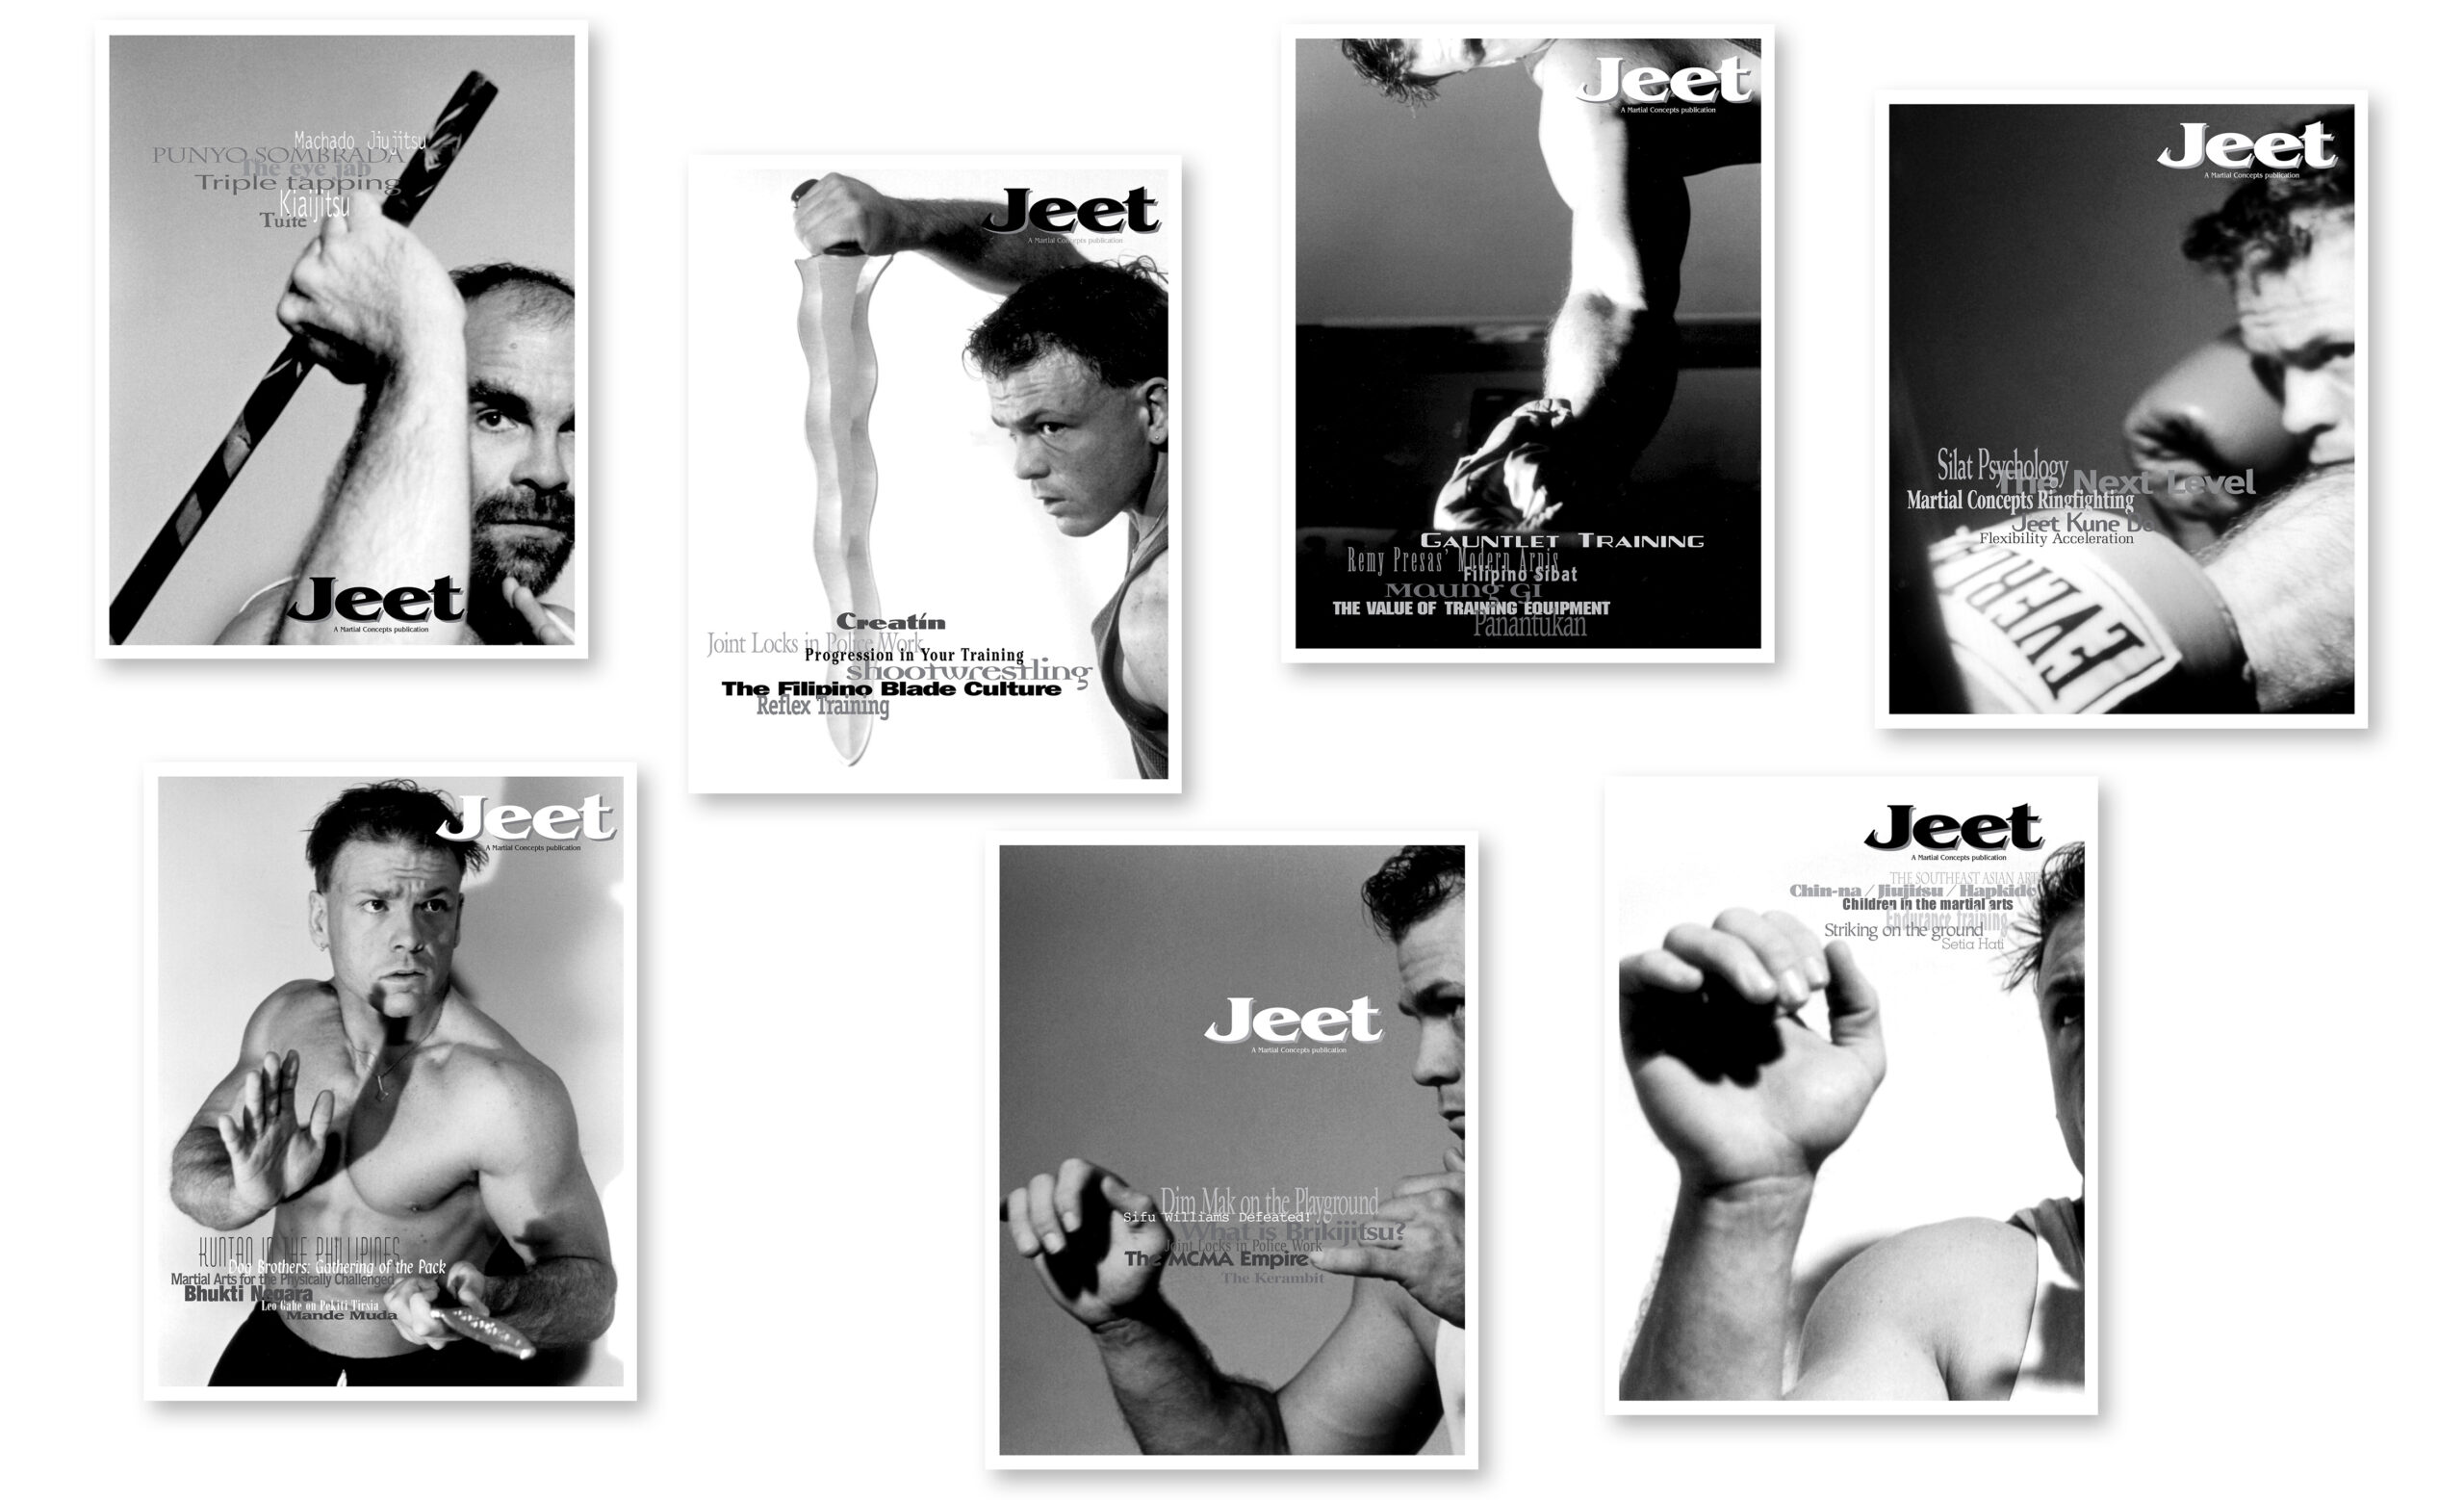 Jeet martial arts magazine covers